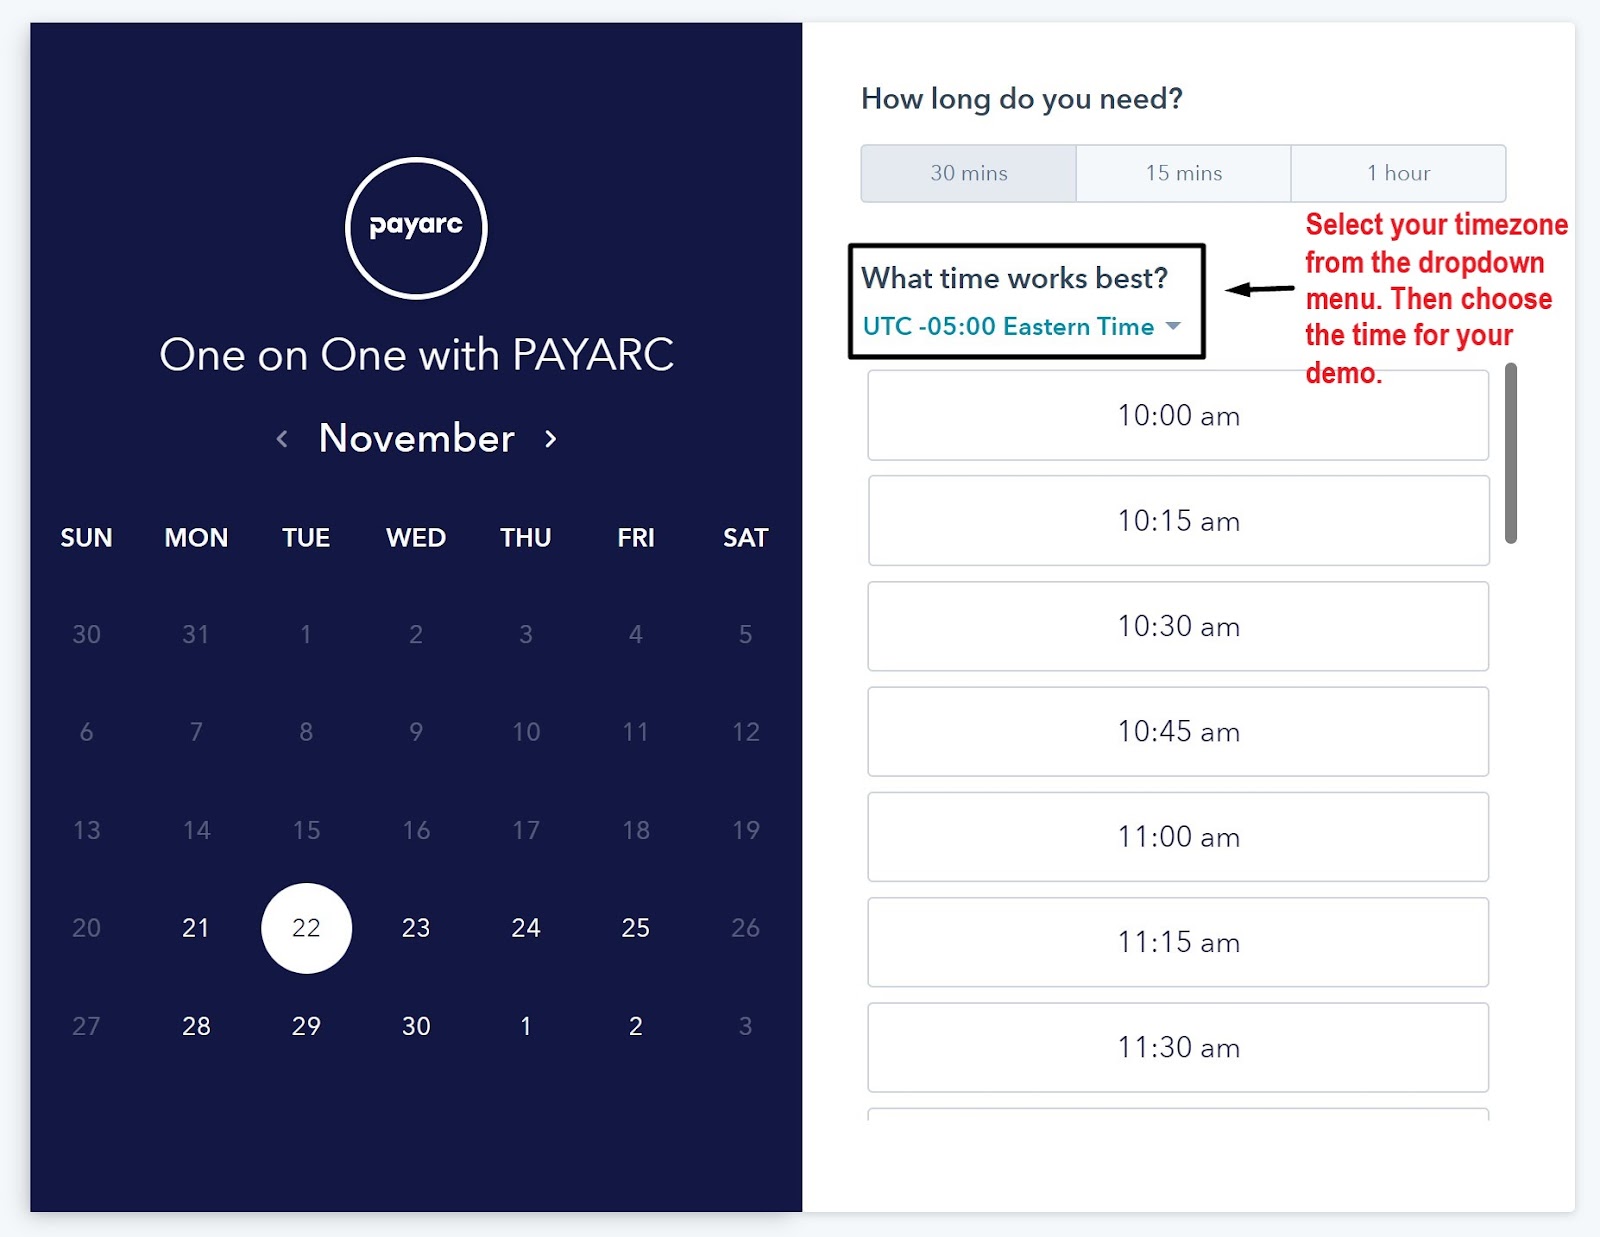 Payarc book a demo date and time form